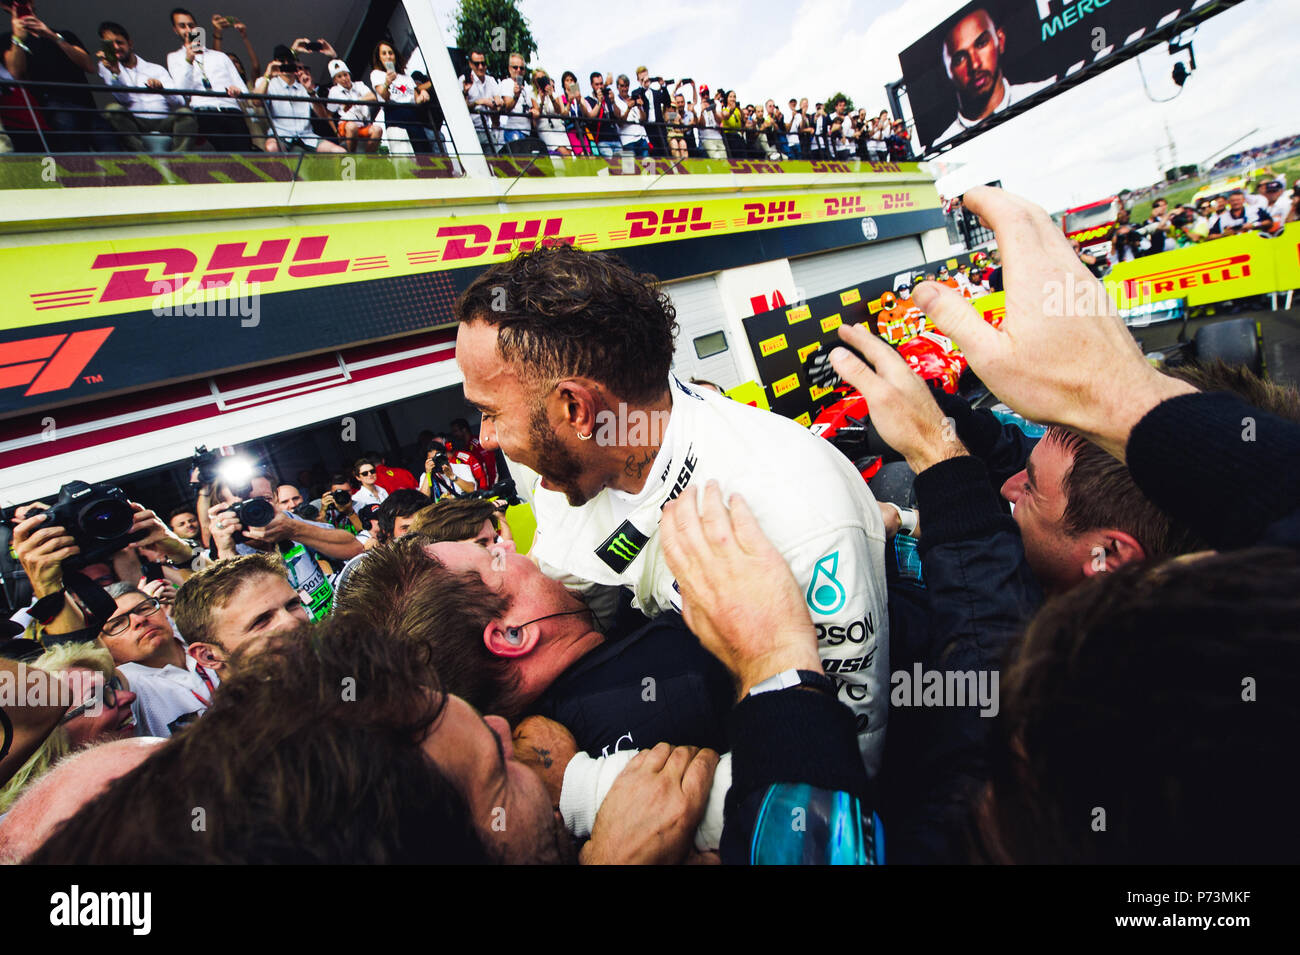 Lewis Hamilton celebrates victory at the 2018 French Grand Prix with his Mercedes team mates. Credit: Sergey Savrasov / Spacesuit Media. Stock Photo